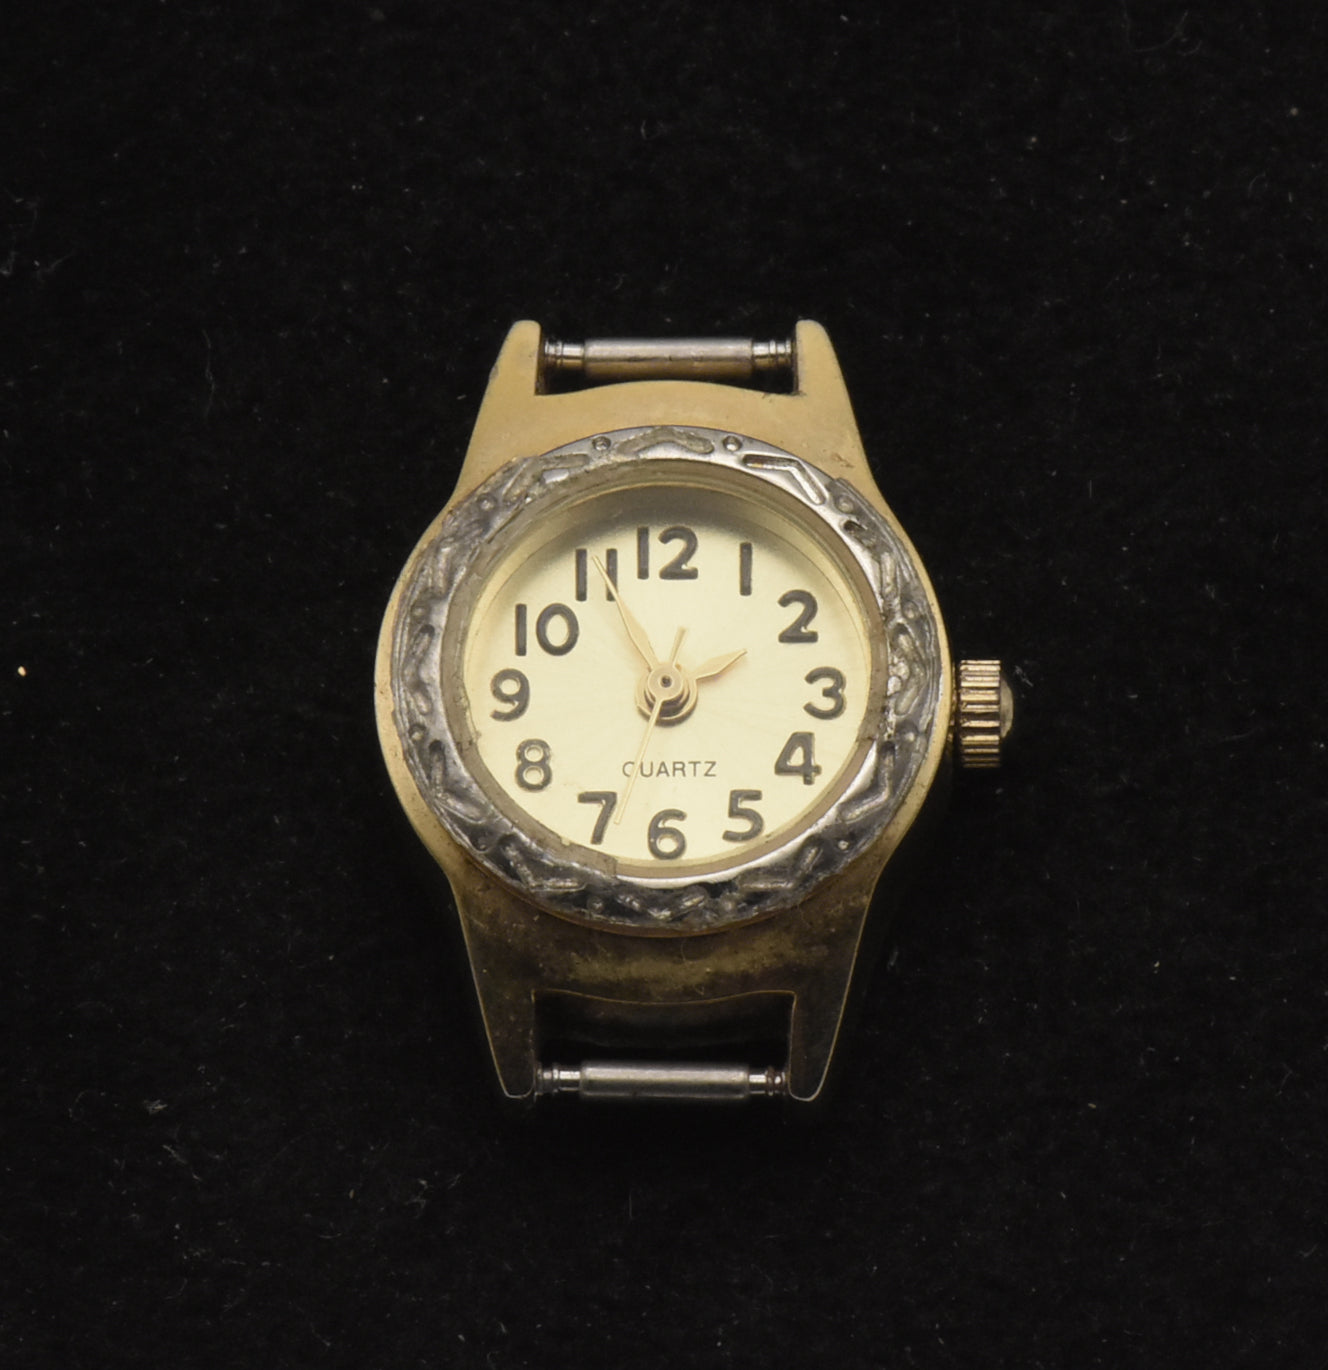 Vintage Gold Tone Metal with Silver Tone Engraved Bezel Analog Watch Face